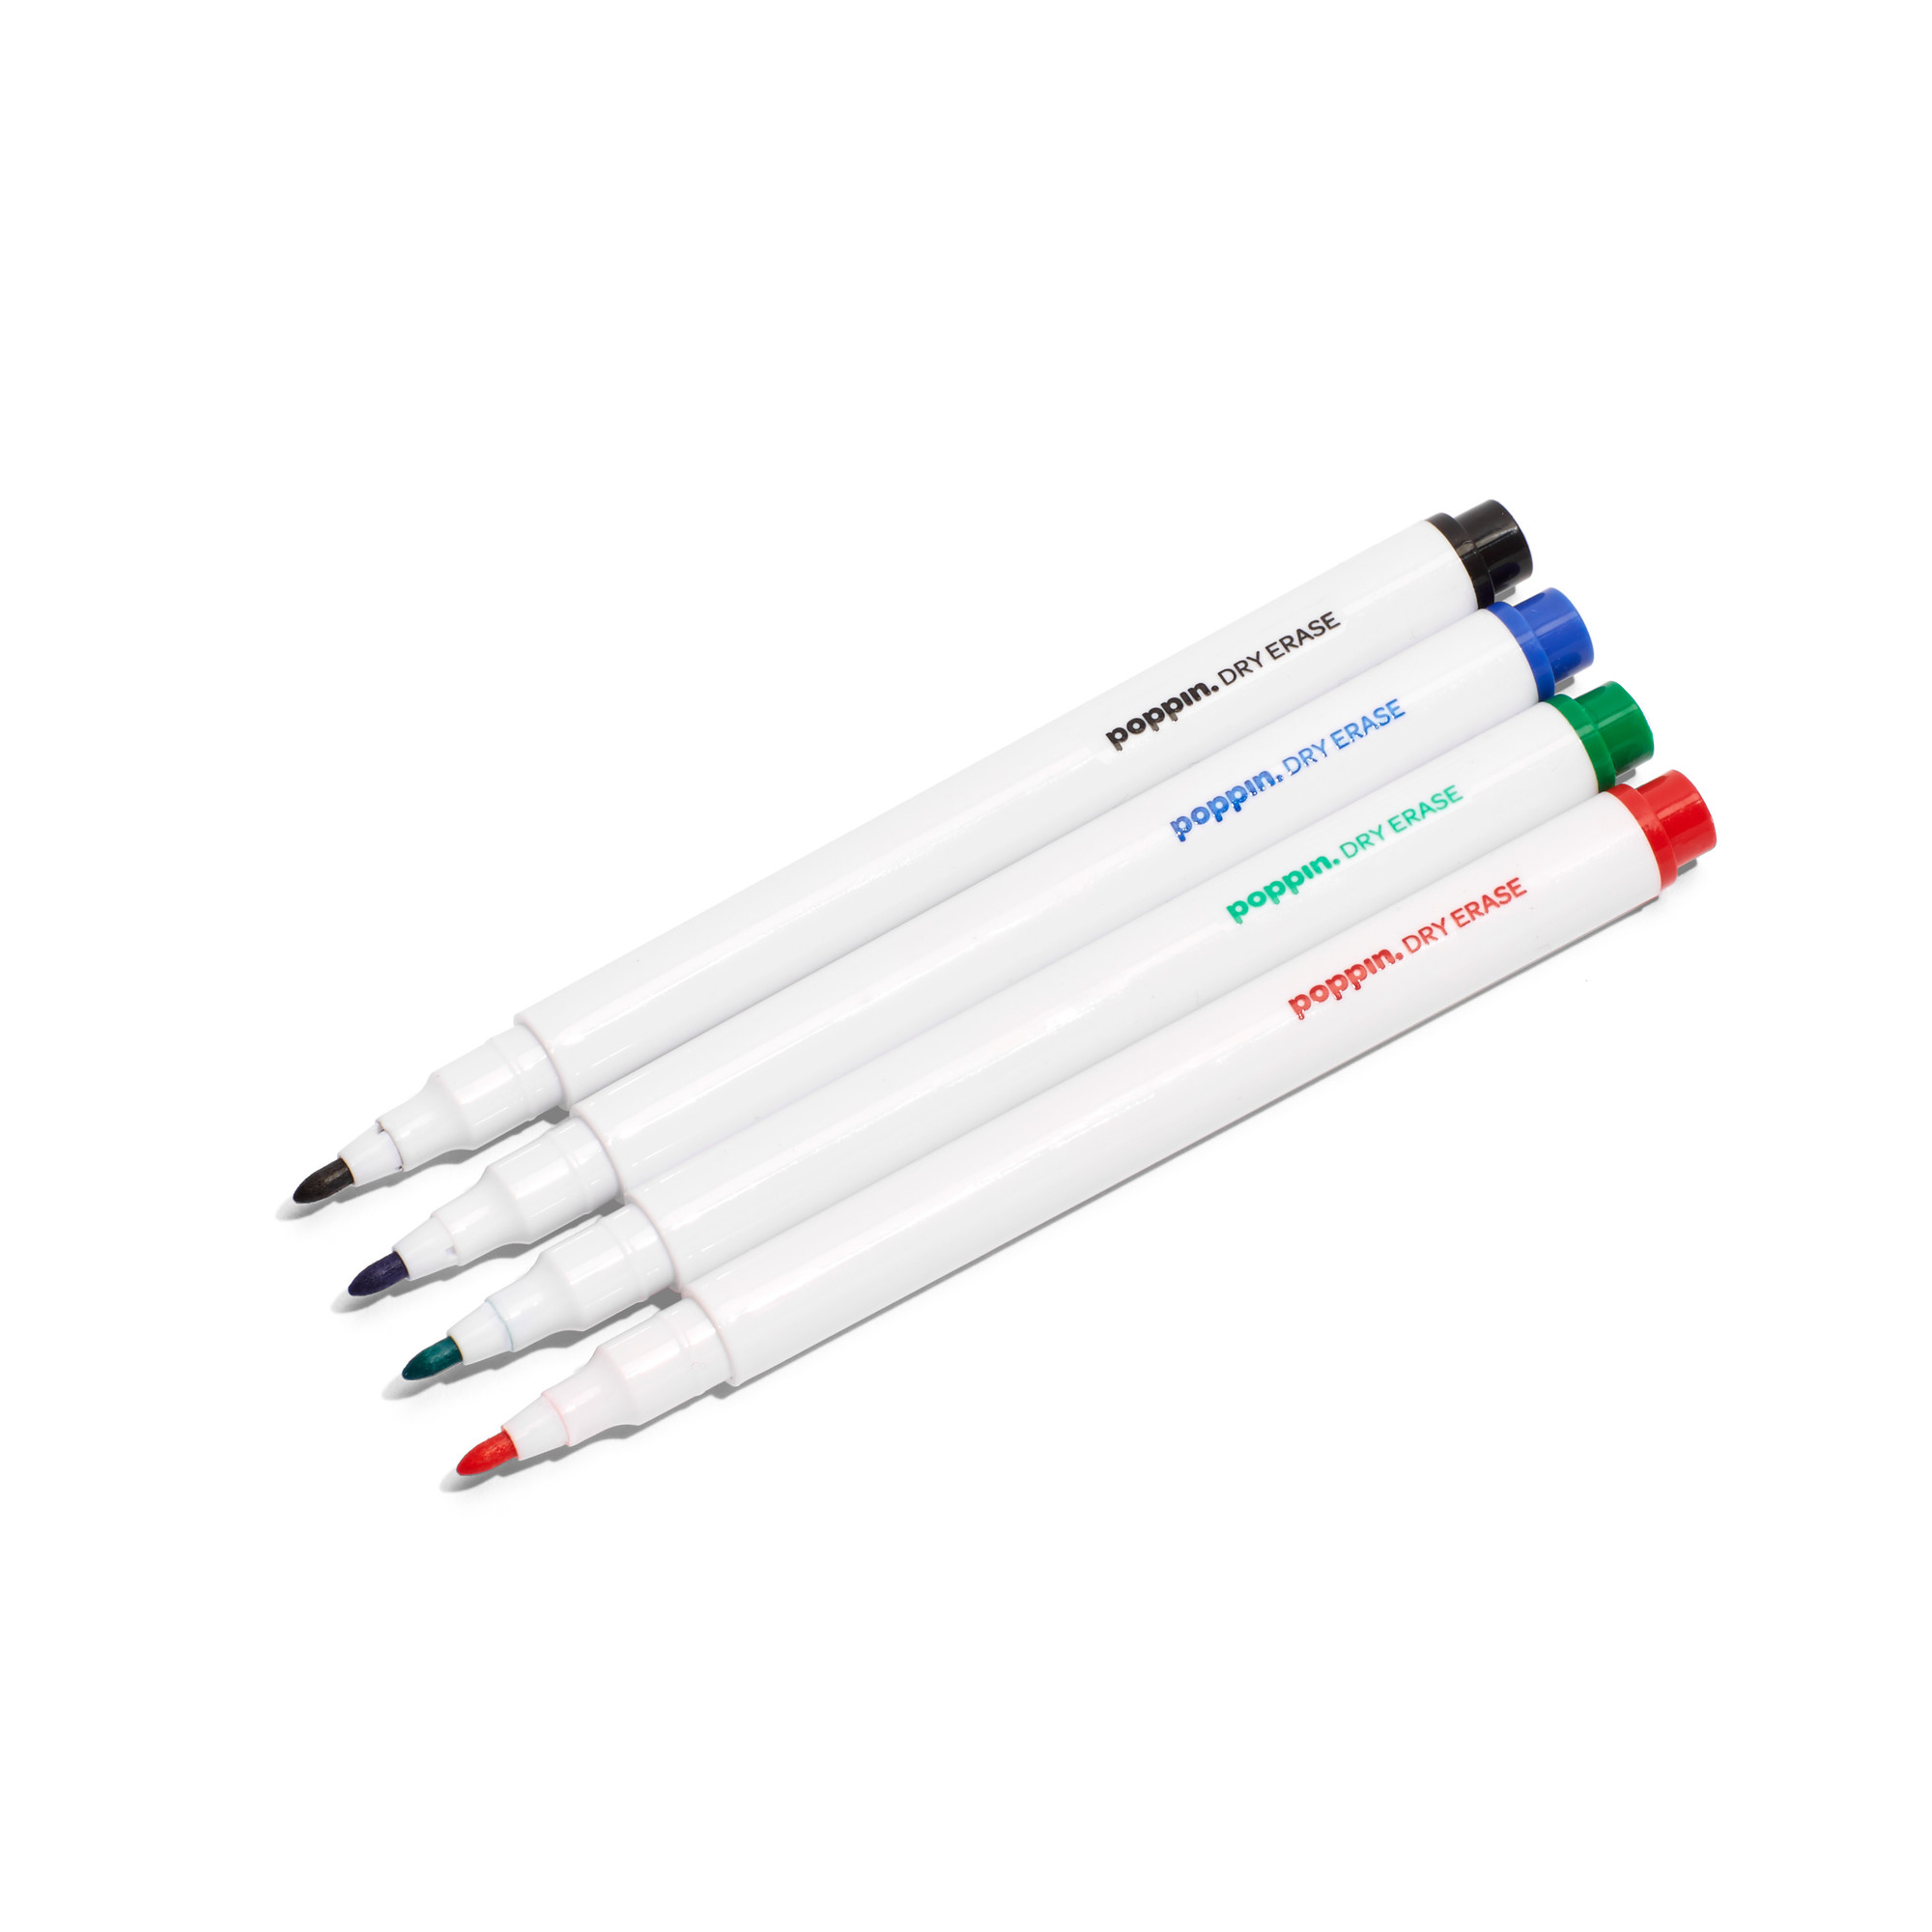 https://poppin.imgix.net/products/jan_feb_mar2018/poppin_dry_erase_markers_set_of_4.jpg